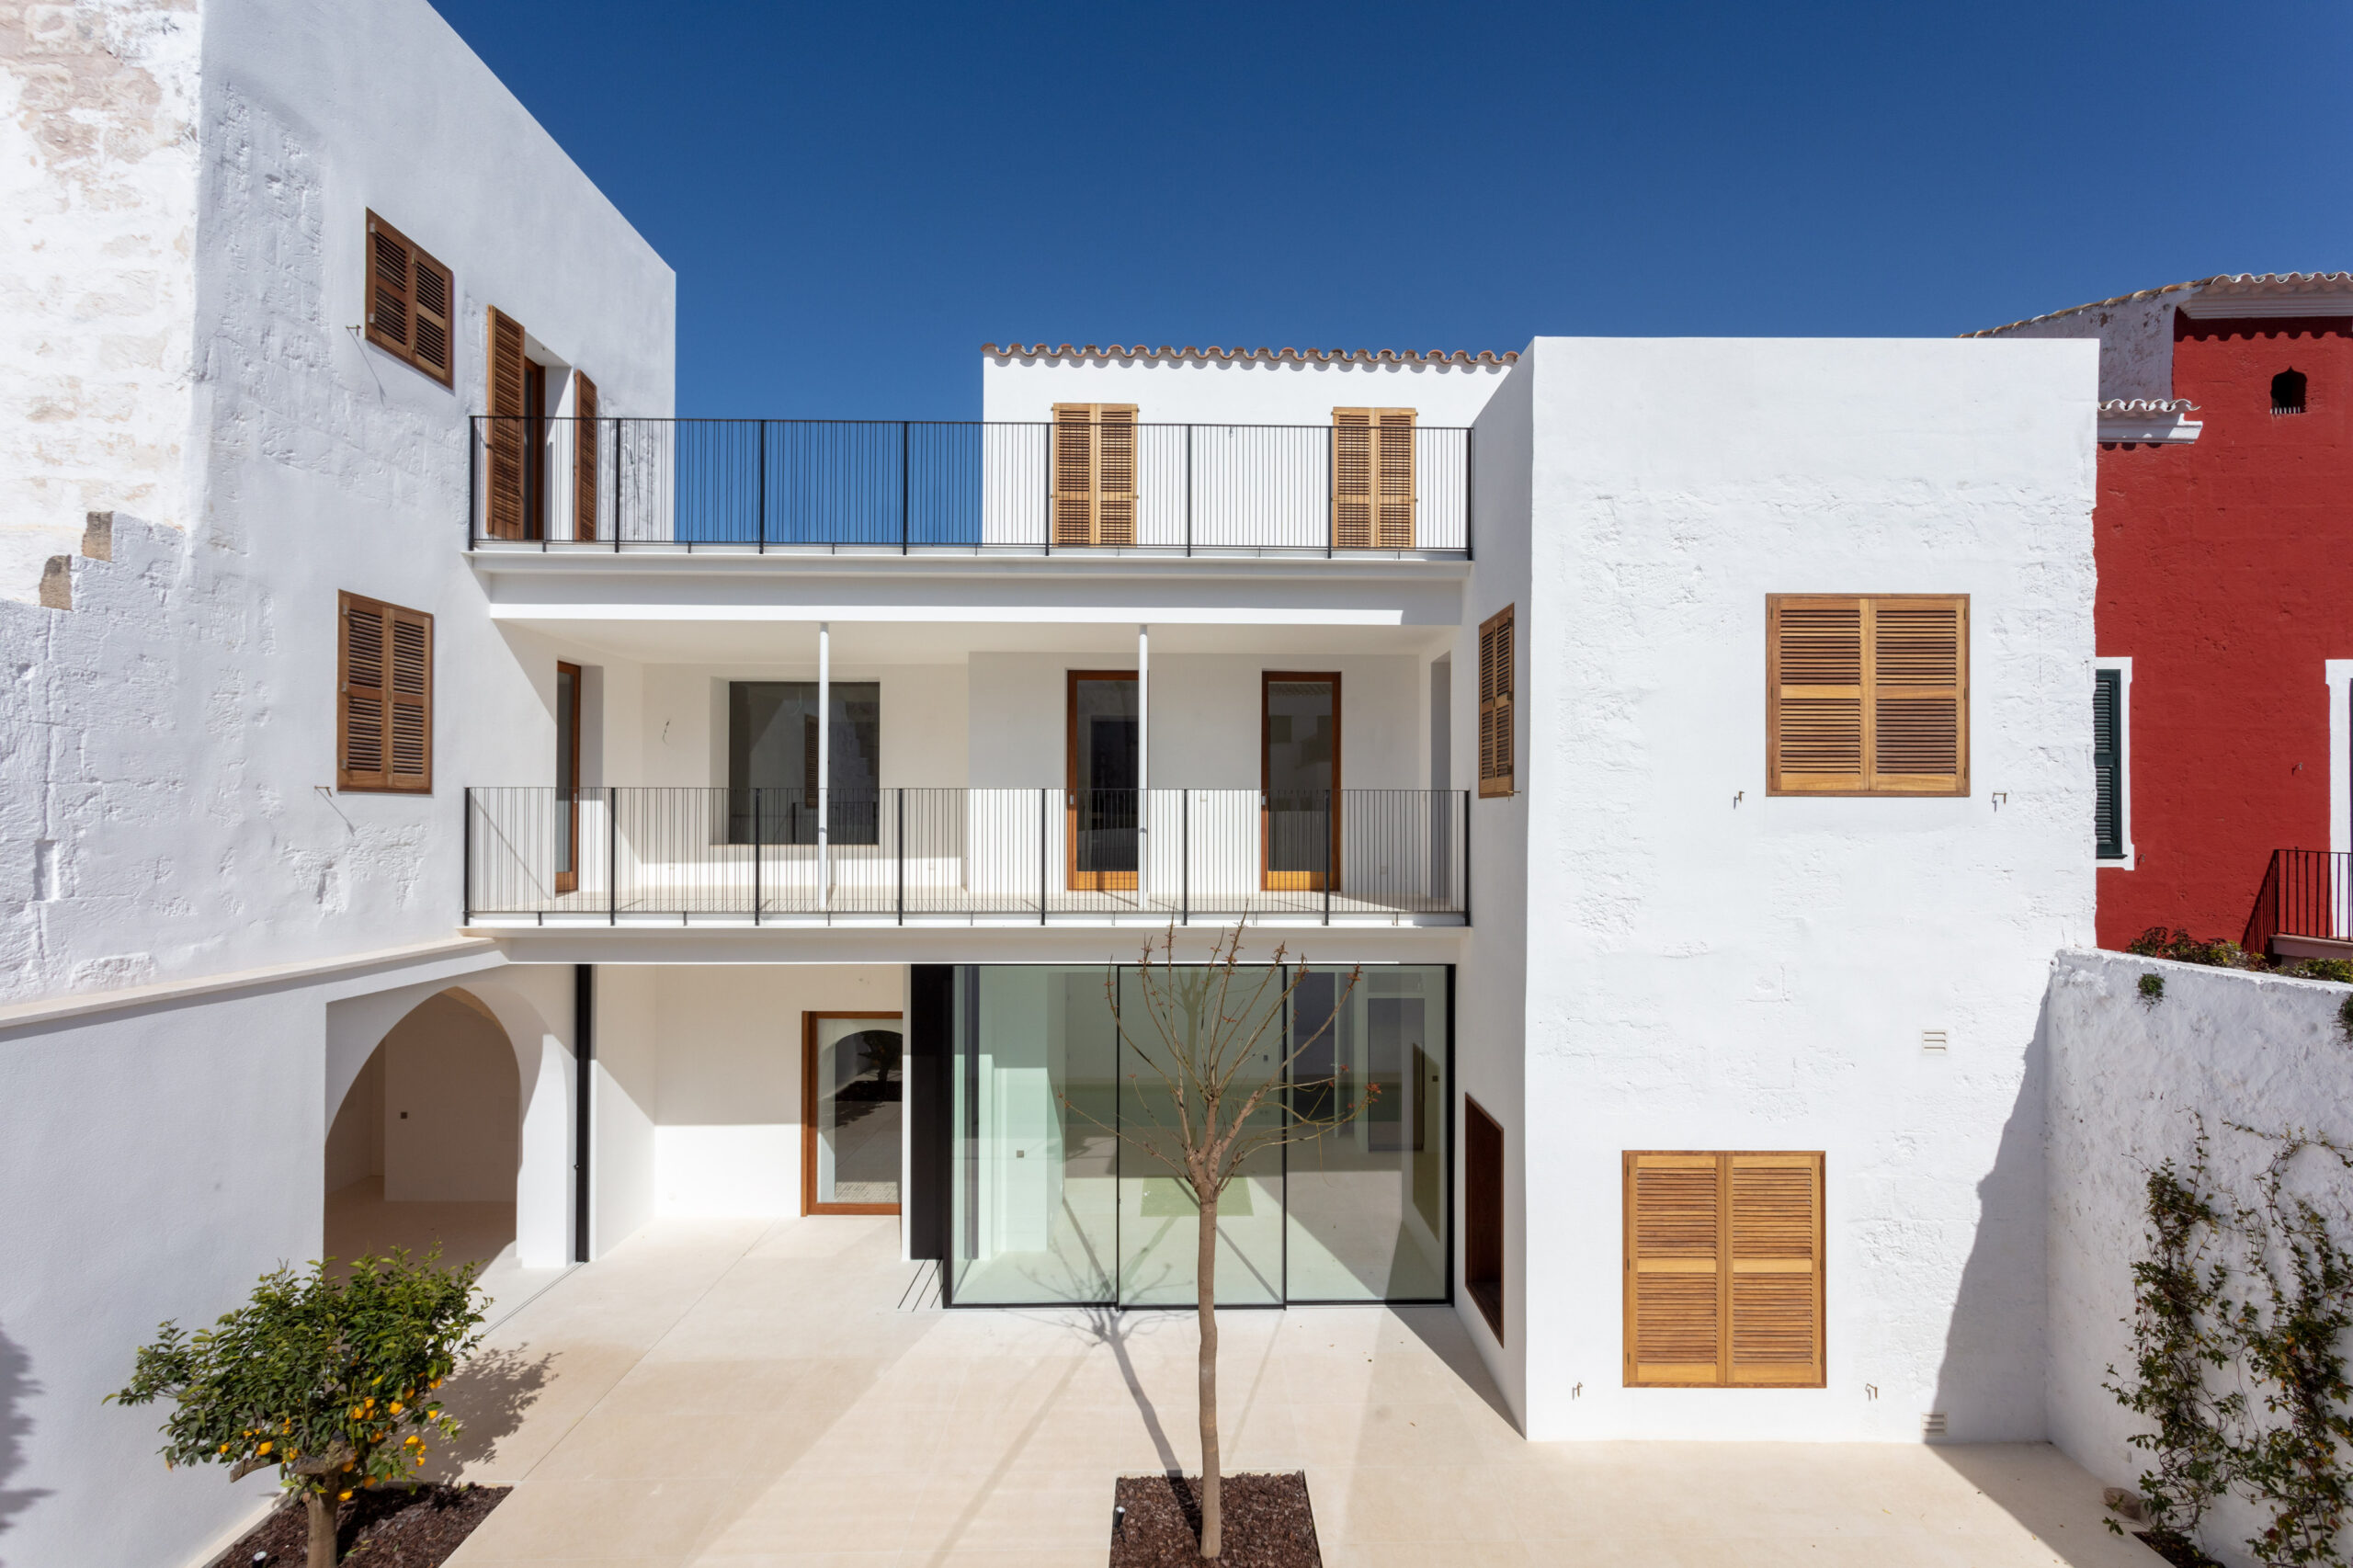 Villa B selected as finalist for THE PLAN Award 2022 in the category for Renovation